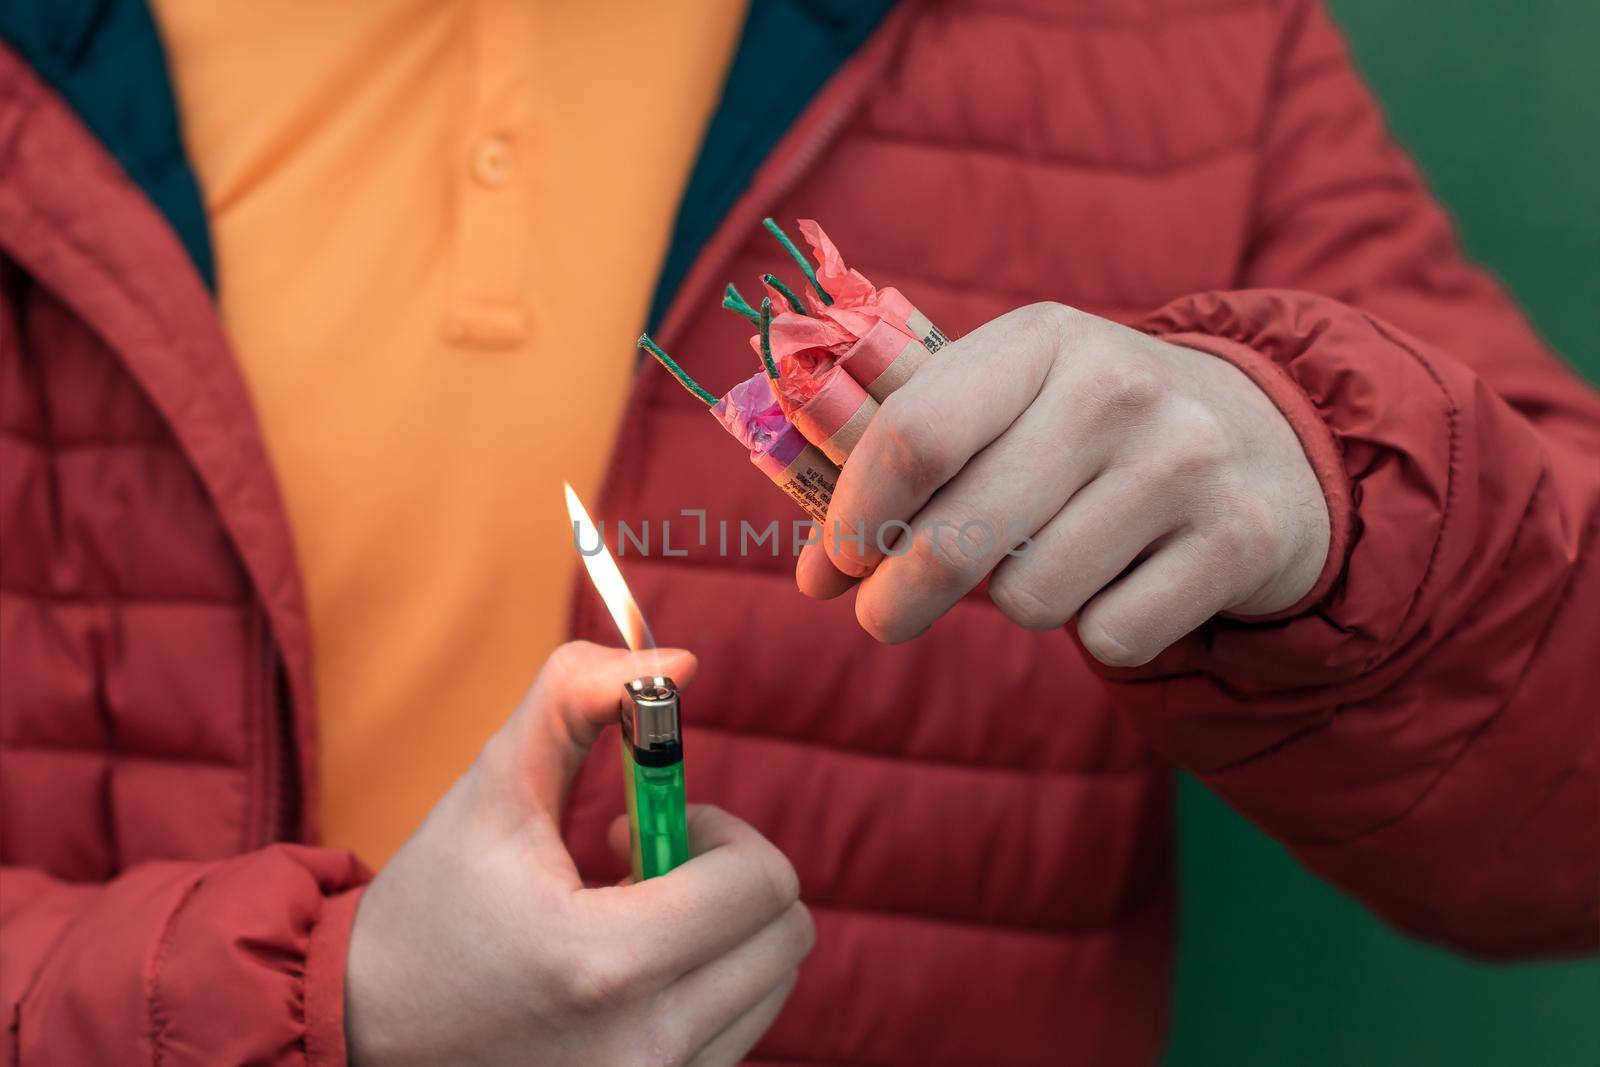 Man in Red Jacked Lighting Up Several Firecrackers in his Hand Using Gas Lighter. Guy Getting Ready for New Year Fun with Fireworks or Pyrotechnic Products